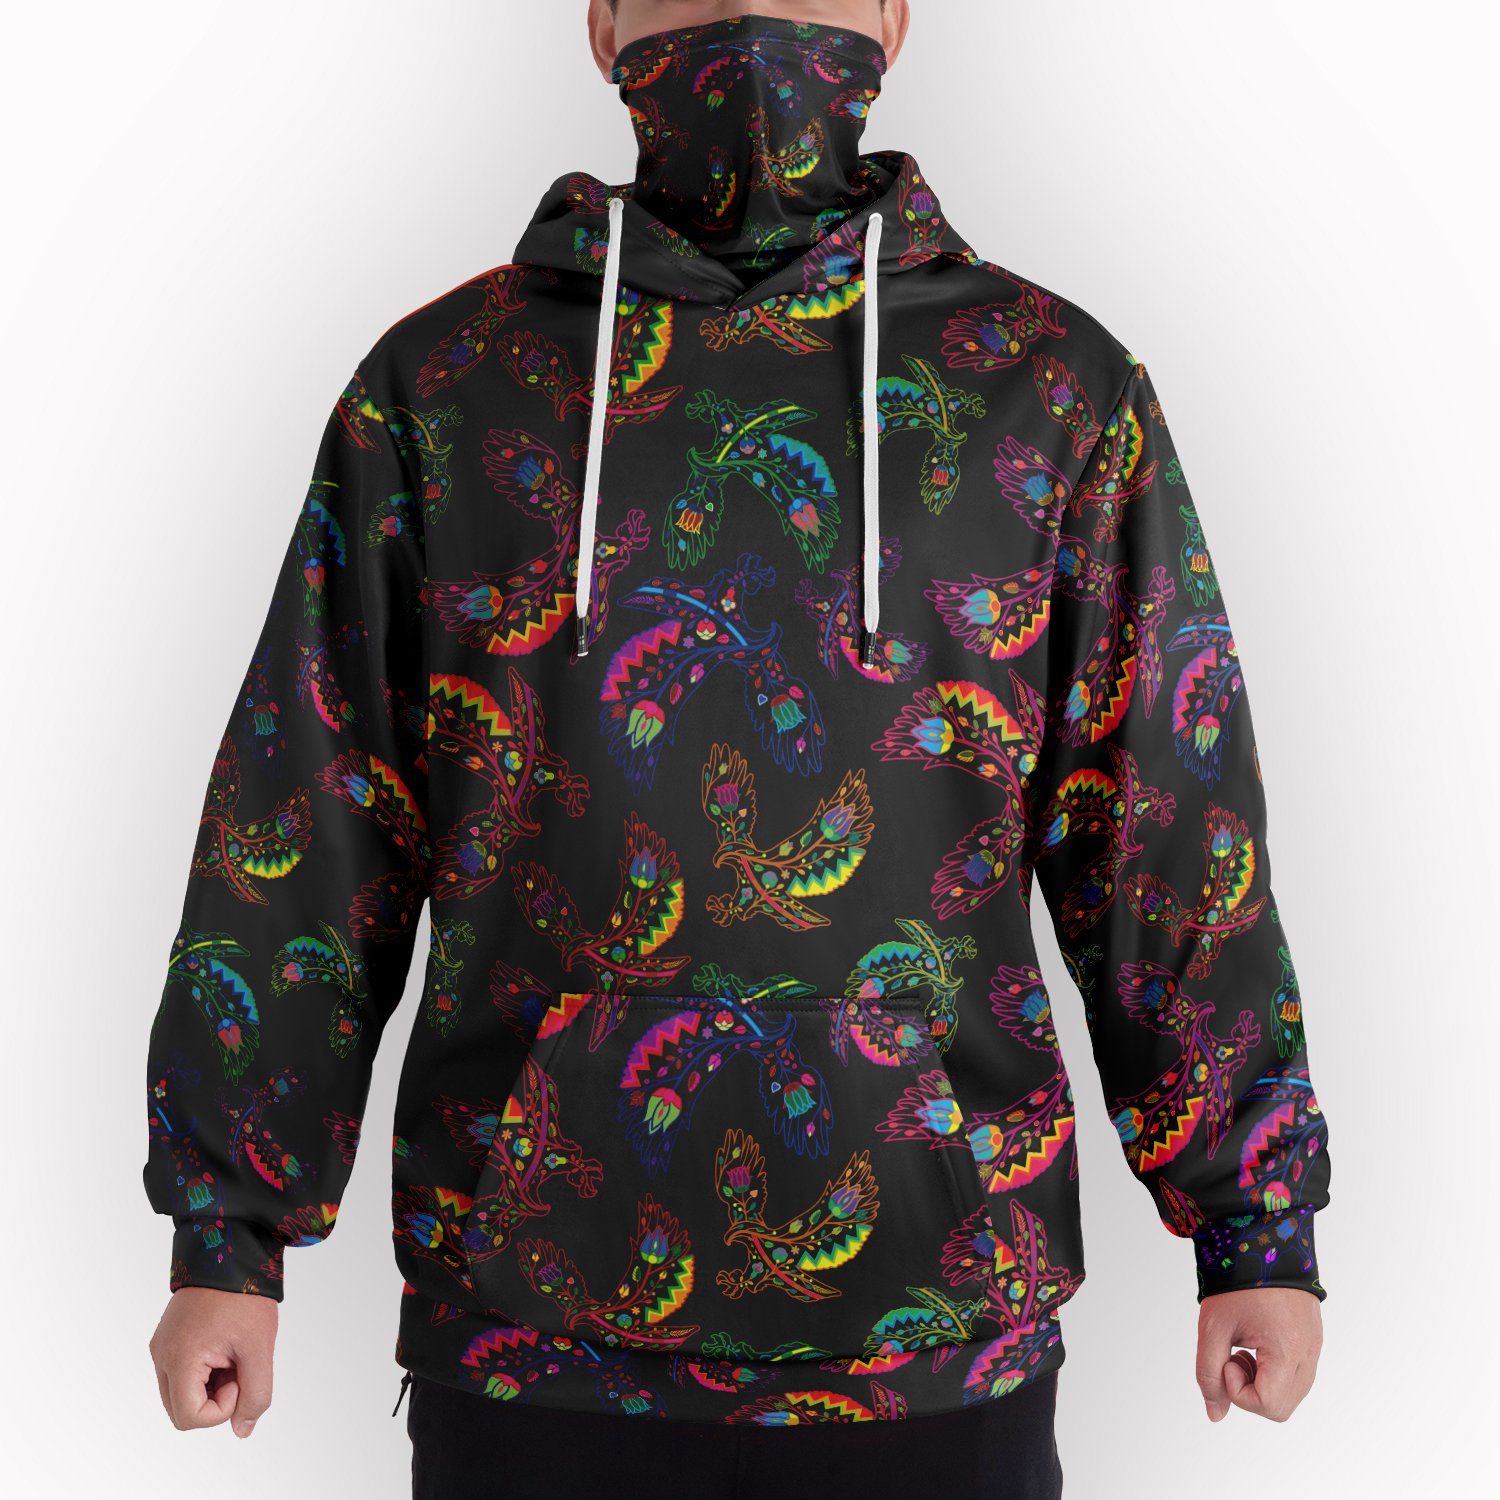 Neon Floral Eagles Hoodie with Face Cover 49 Dzine 